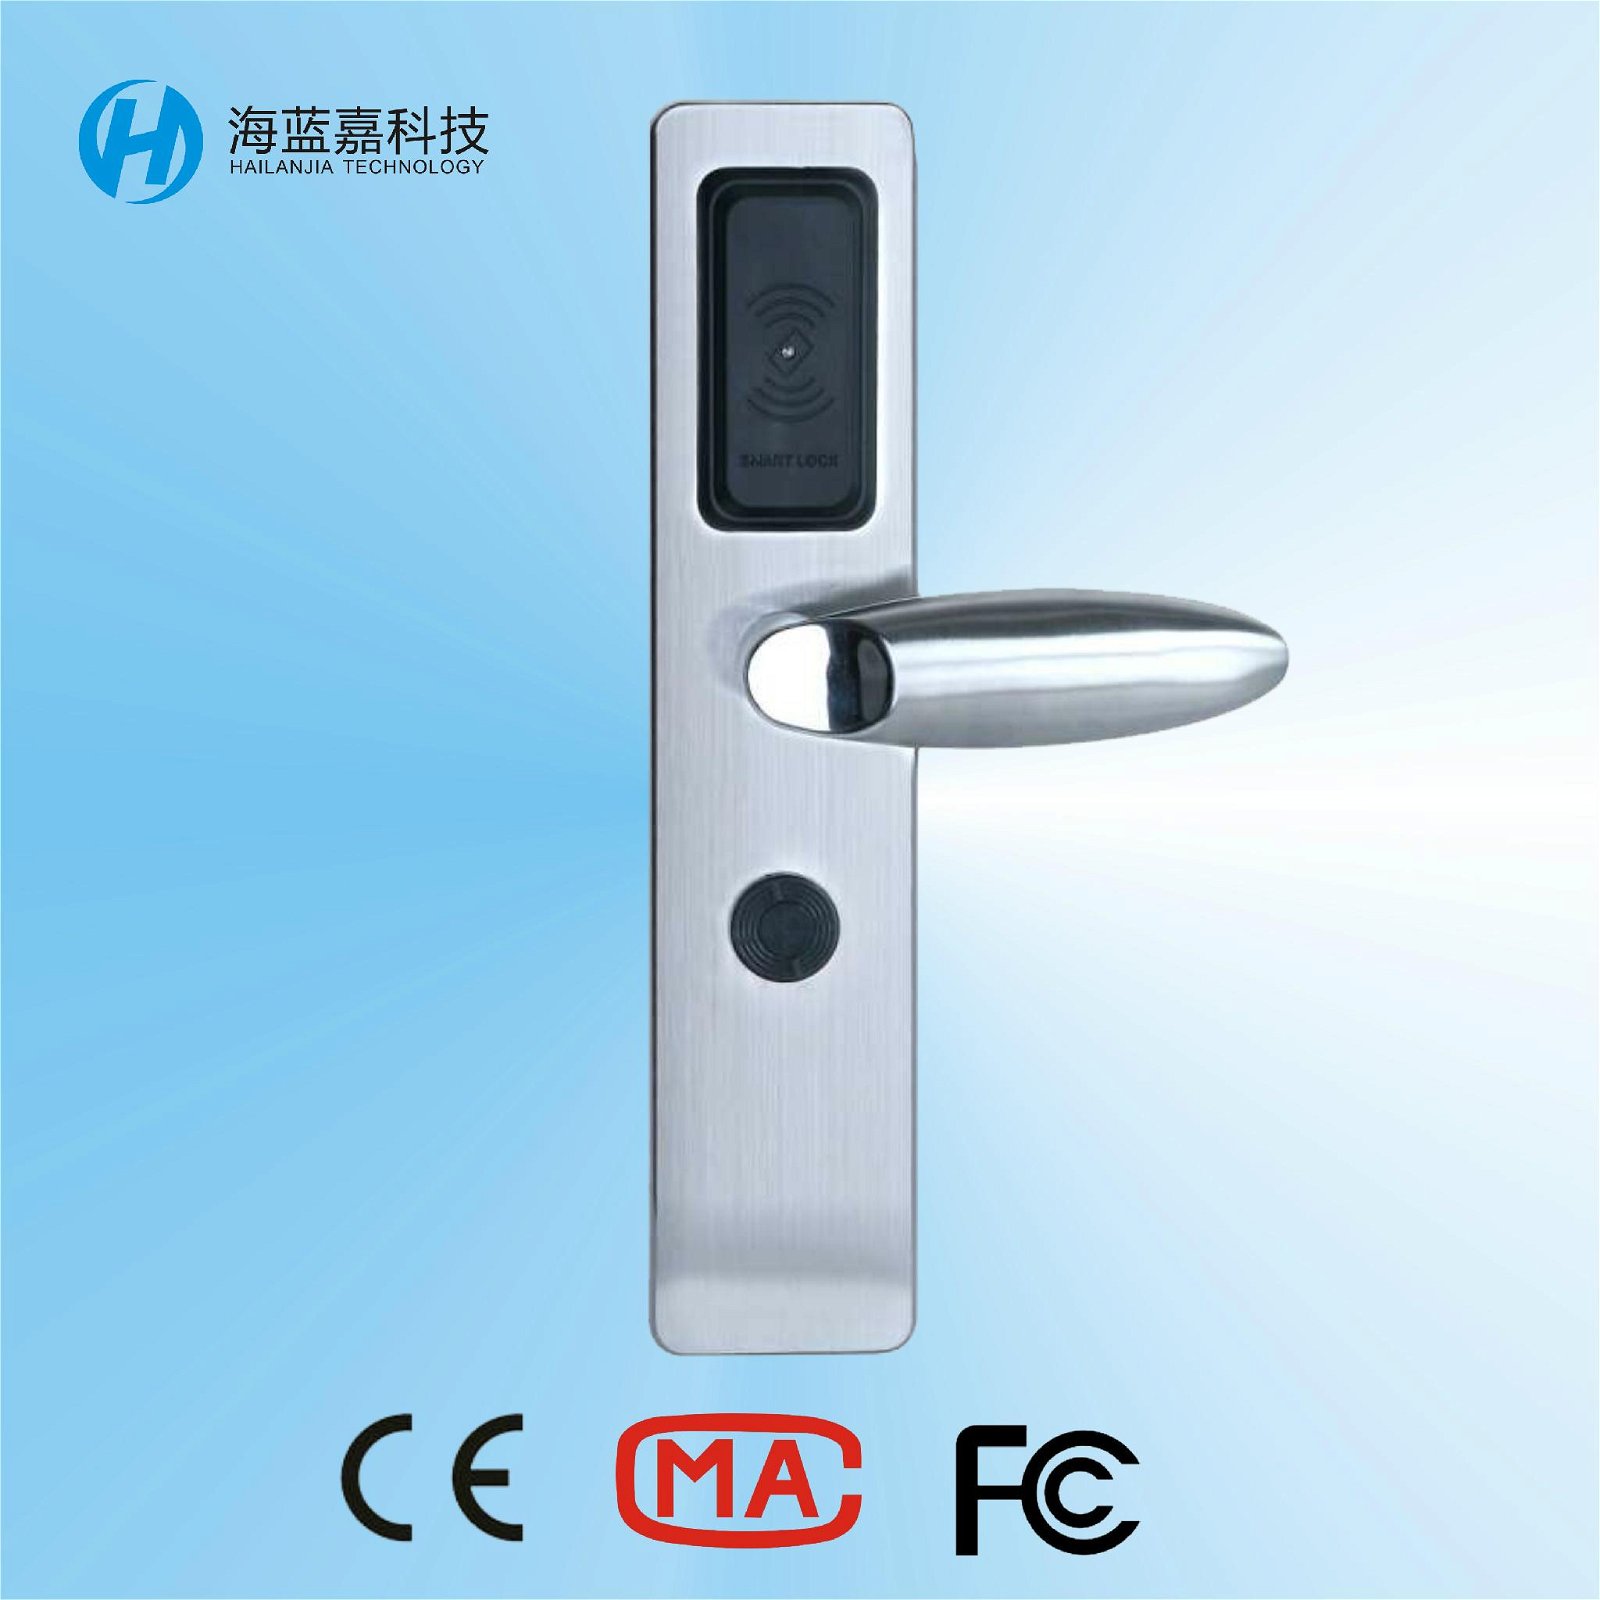 Newly-released electronic hotel lock system malaysia 2